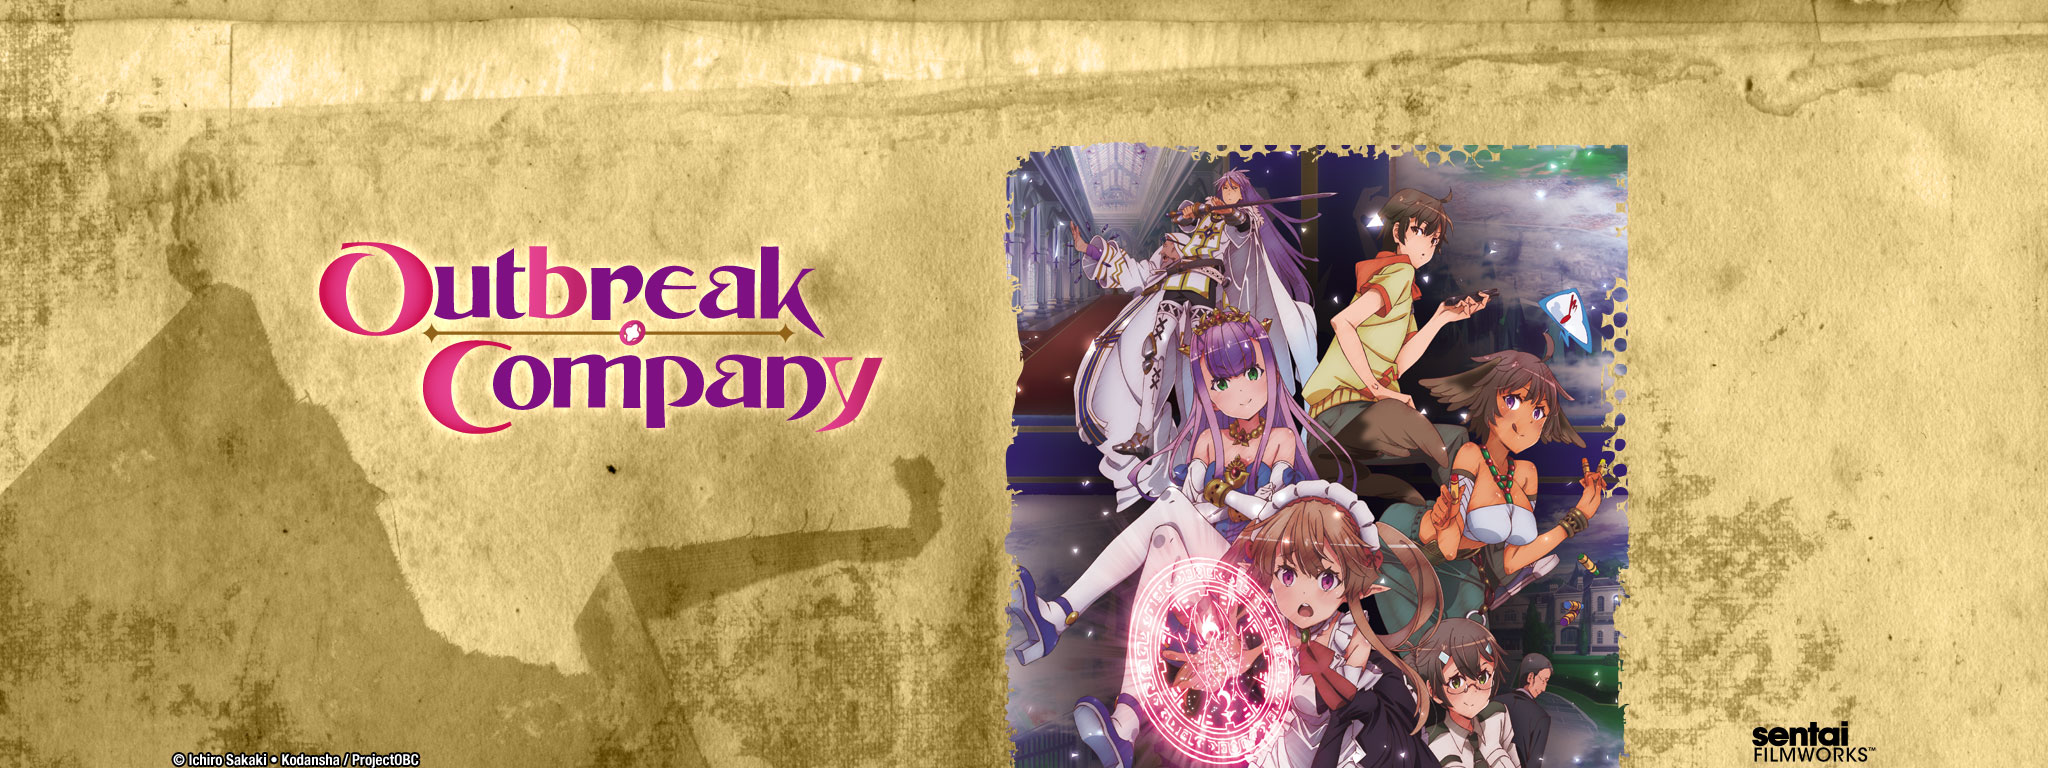 Title Art for Outbreak Company